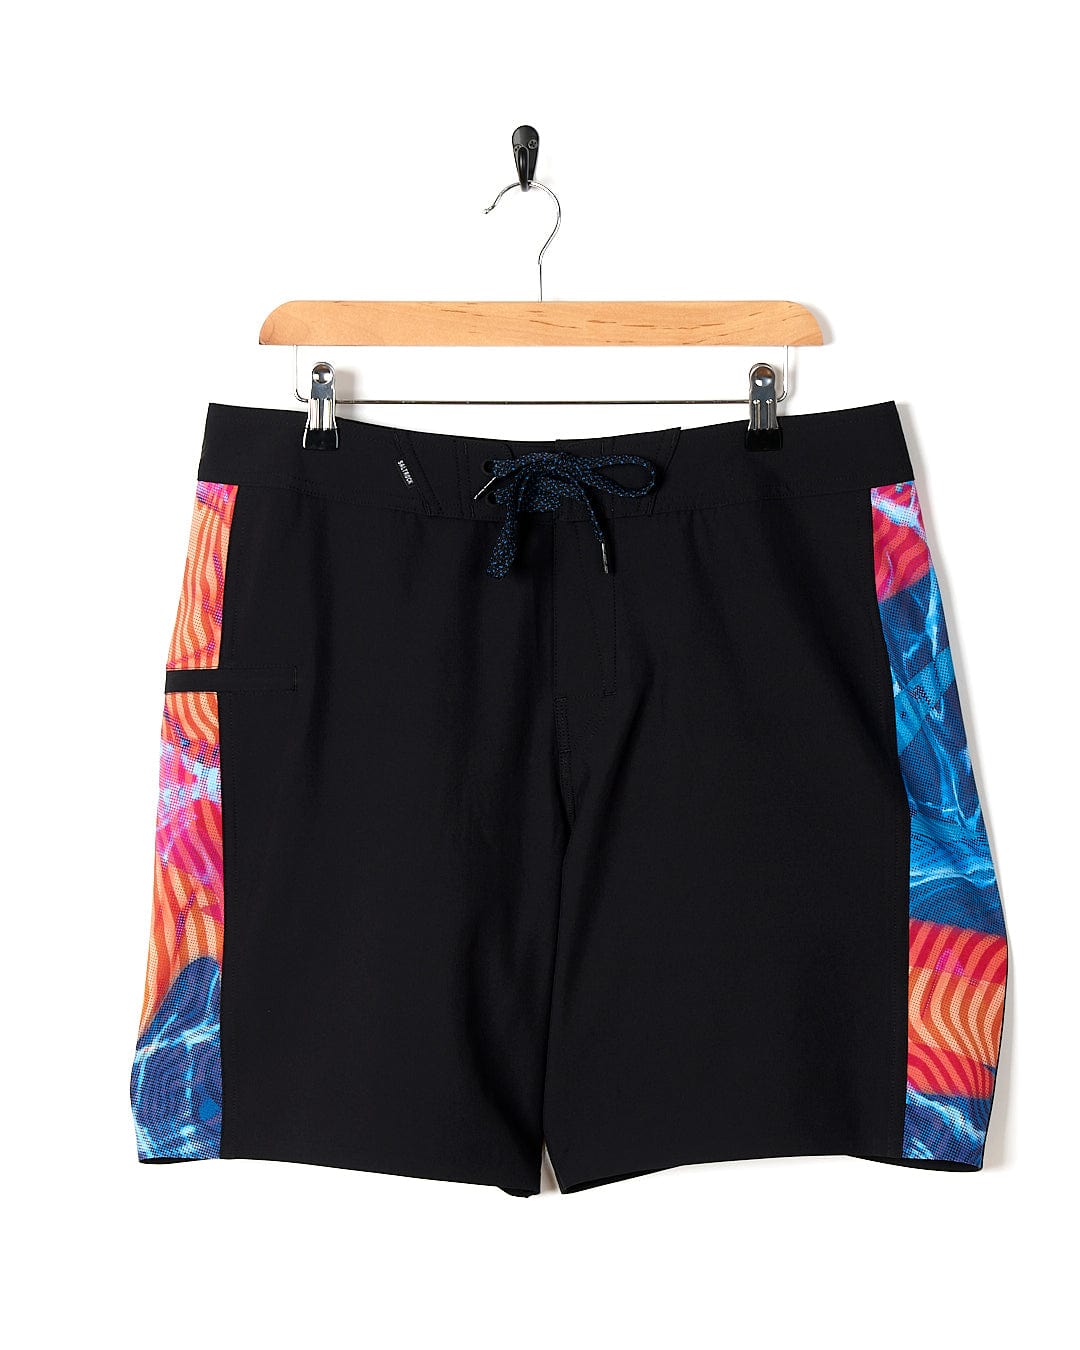 A black and blue Poolside Panel - Mens Recycled 4-Way Stretch Boardshort with a colorful print, by Saltrock.